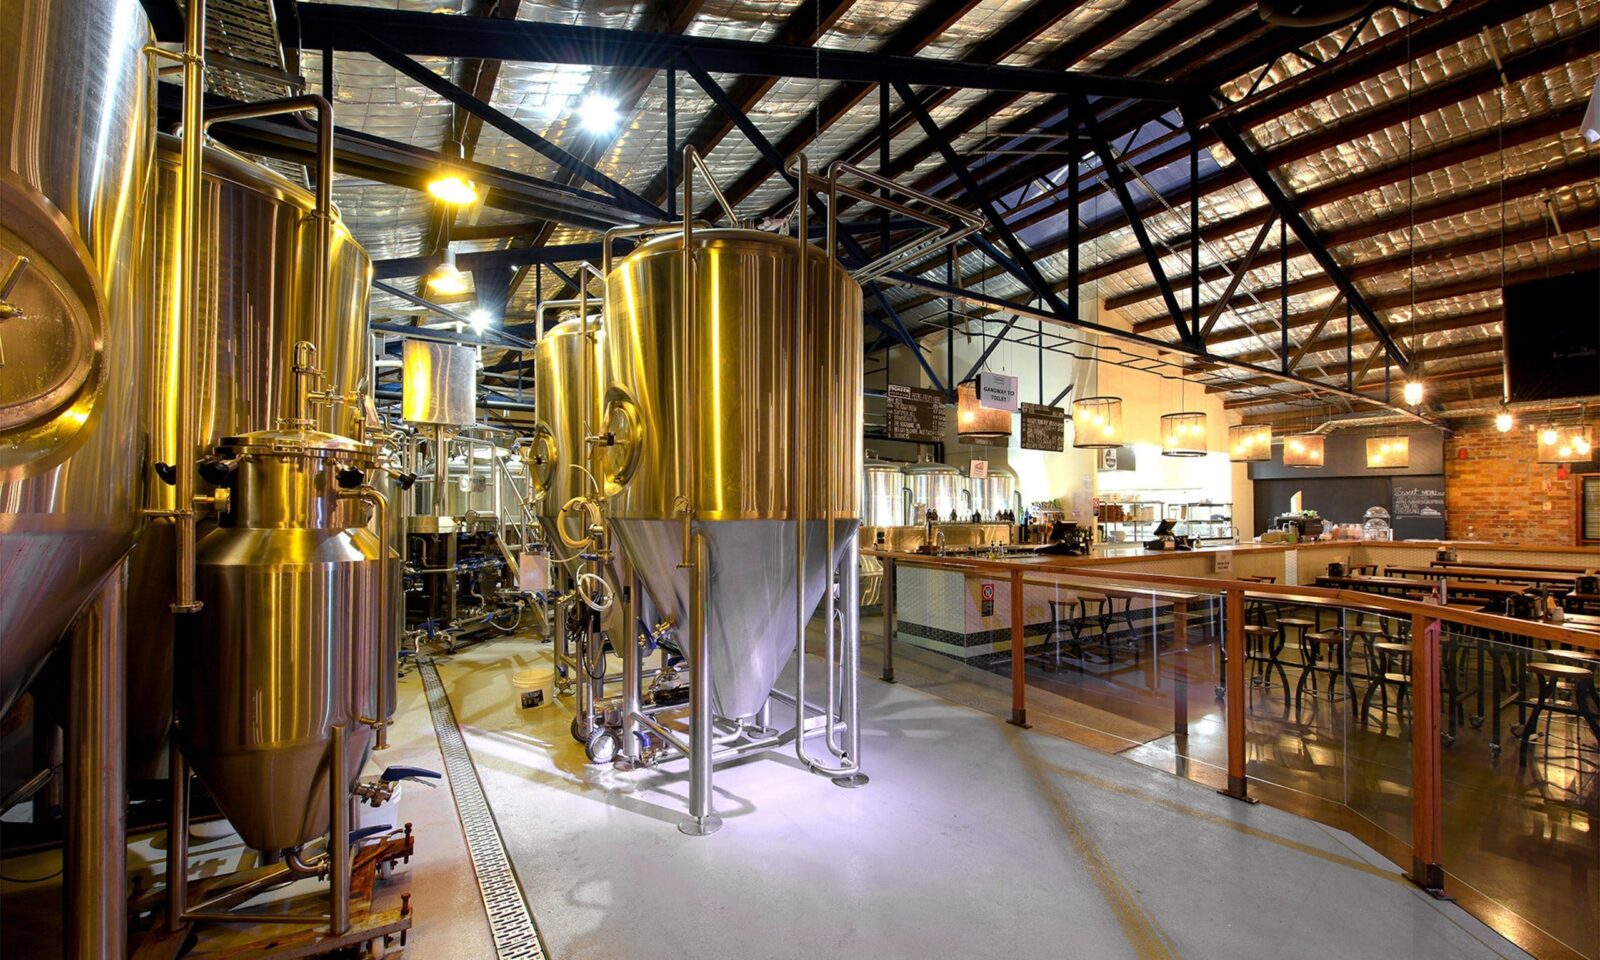 Interior of FogHorn Brewhouse with fermentation tanks in brewery area